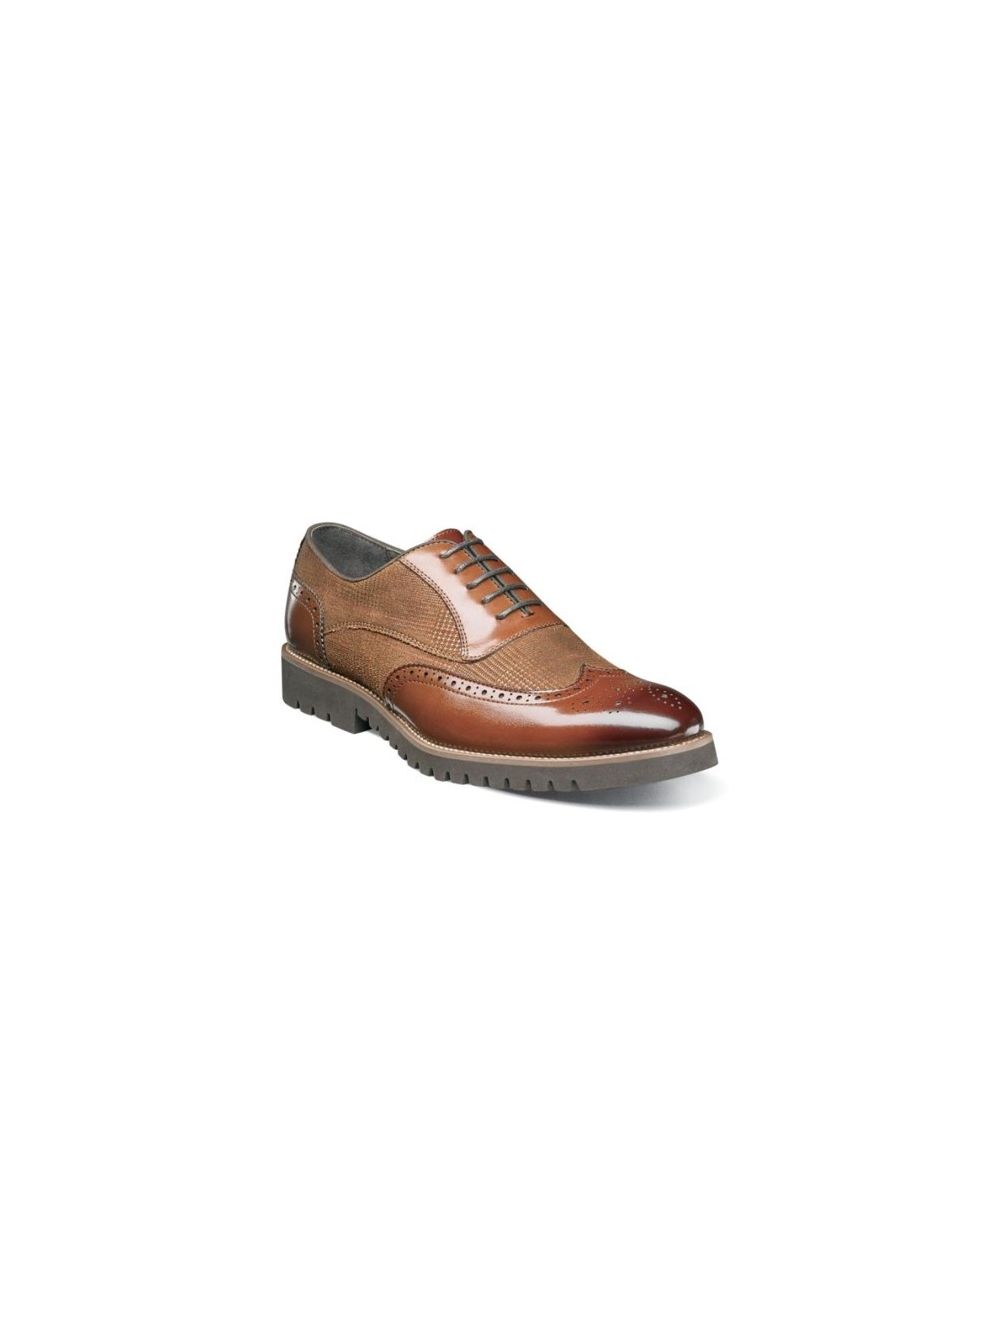 Stacy Adams Baxley Printed Wing Tip Oxford